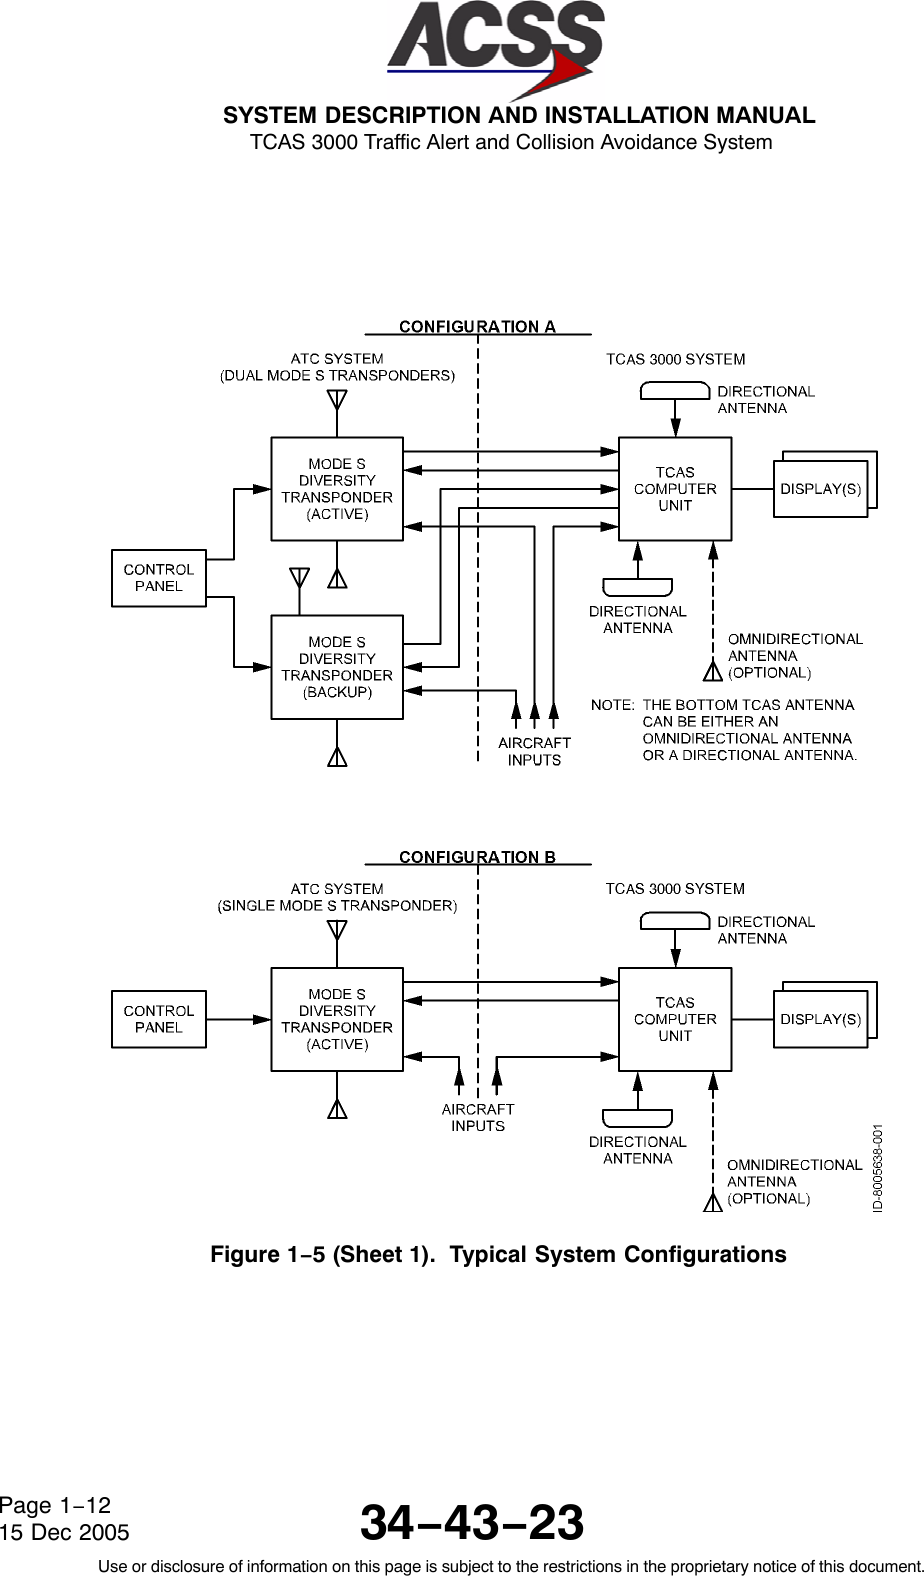  SYSTEM DESCRIPTION AND INSTALLATION MANUAL TCAS 3000 Traffic Alert and Collision Avoidance System34−43−23Use or disclosure of information on this page is subject to the restrictions in the proprietary notice of this document.Page 1−1215 Dec 2005Figure 1−5 (Sheet 1).  Typical System Configurations